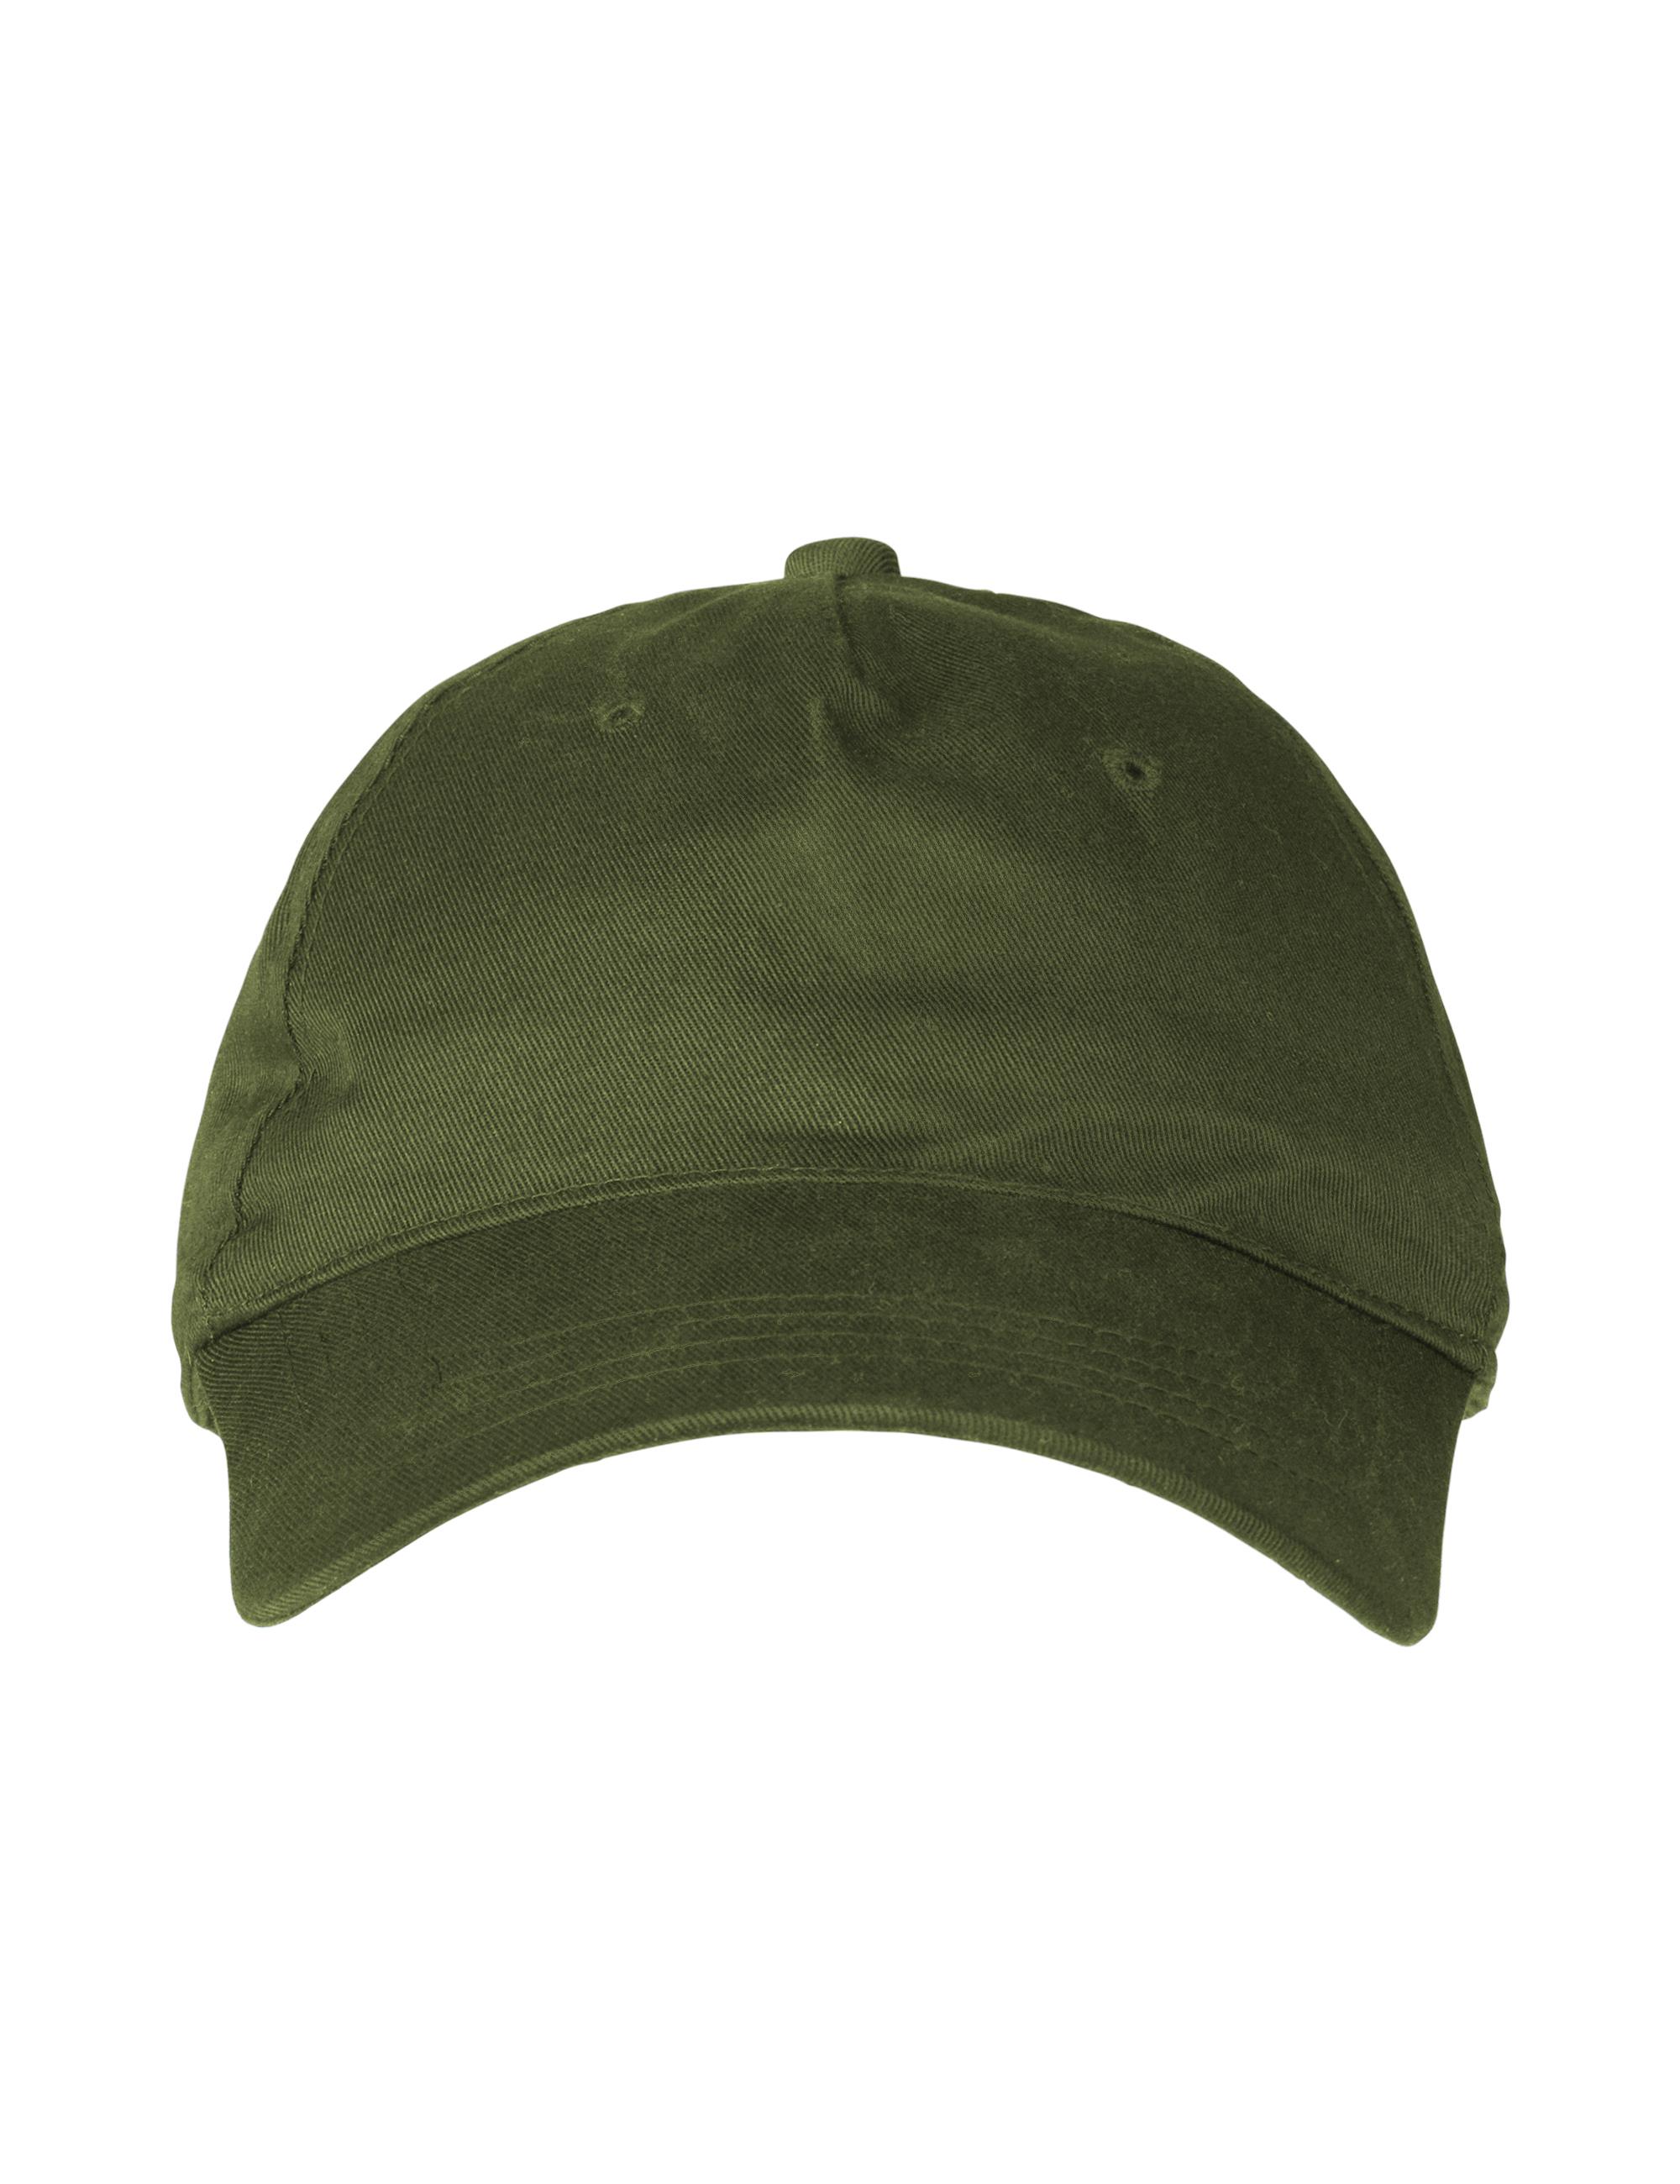 Organic Fairtrade 5 Panel Cap Neutral® Printable ONLY Military